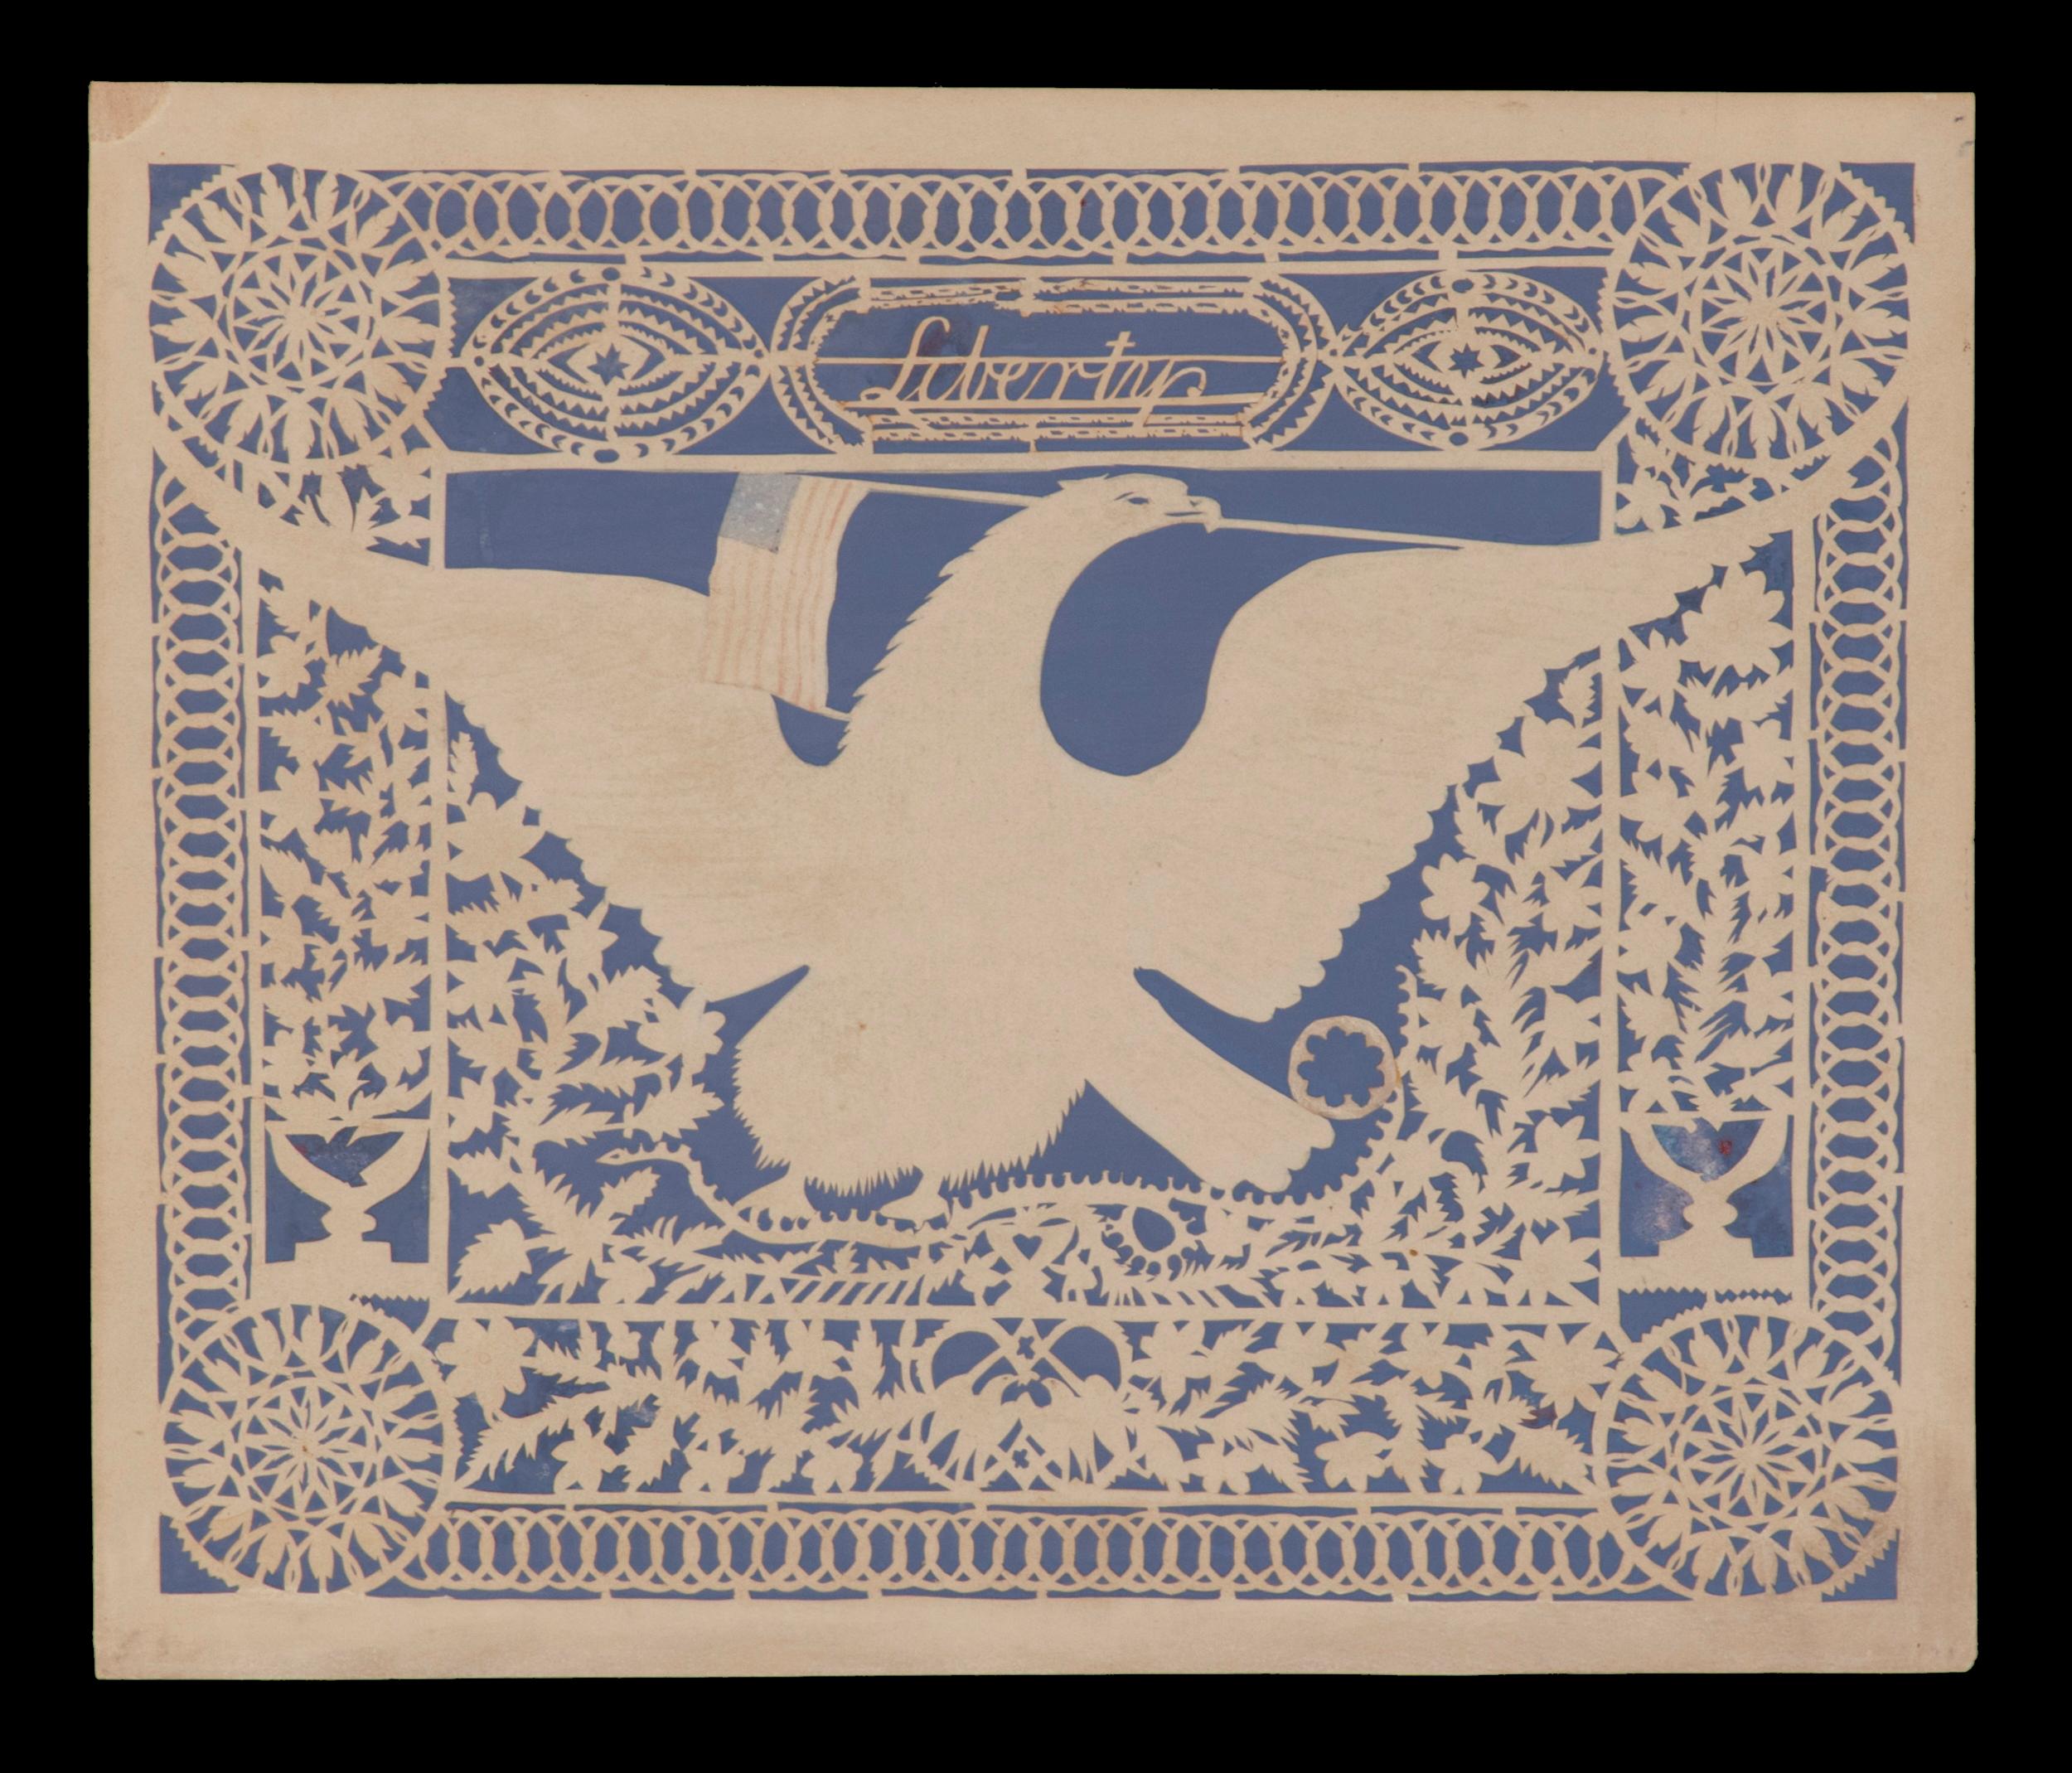 EXCEPTIONAL PATRIOTIC SCHERENSCHNITTE (PAPER CUTTING), IN THE STYLE OFTEN ATTRIBUTED TO ISAAC STIEHLY, ENTITLED “LIBERTY,” WITH IMAGERY THAT INCLUDES AN AMERICAN EAGLE WITH A 14 STAR, 14 STRIPE FLAG IN ITS BEAK, A RATTLESNAKE, LOVE BIRDS, AND EAGLES